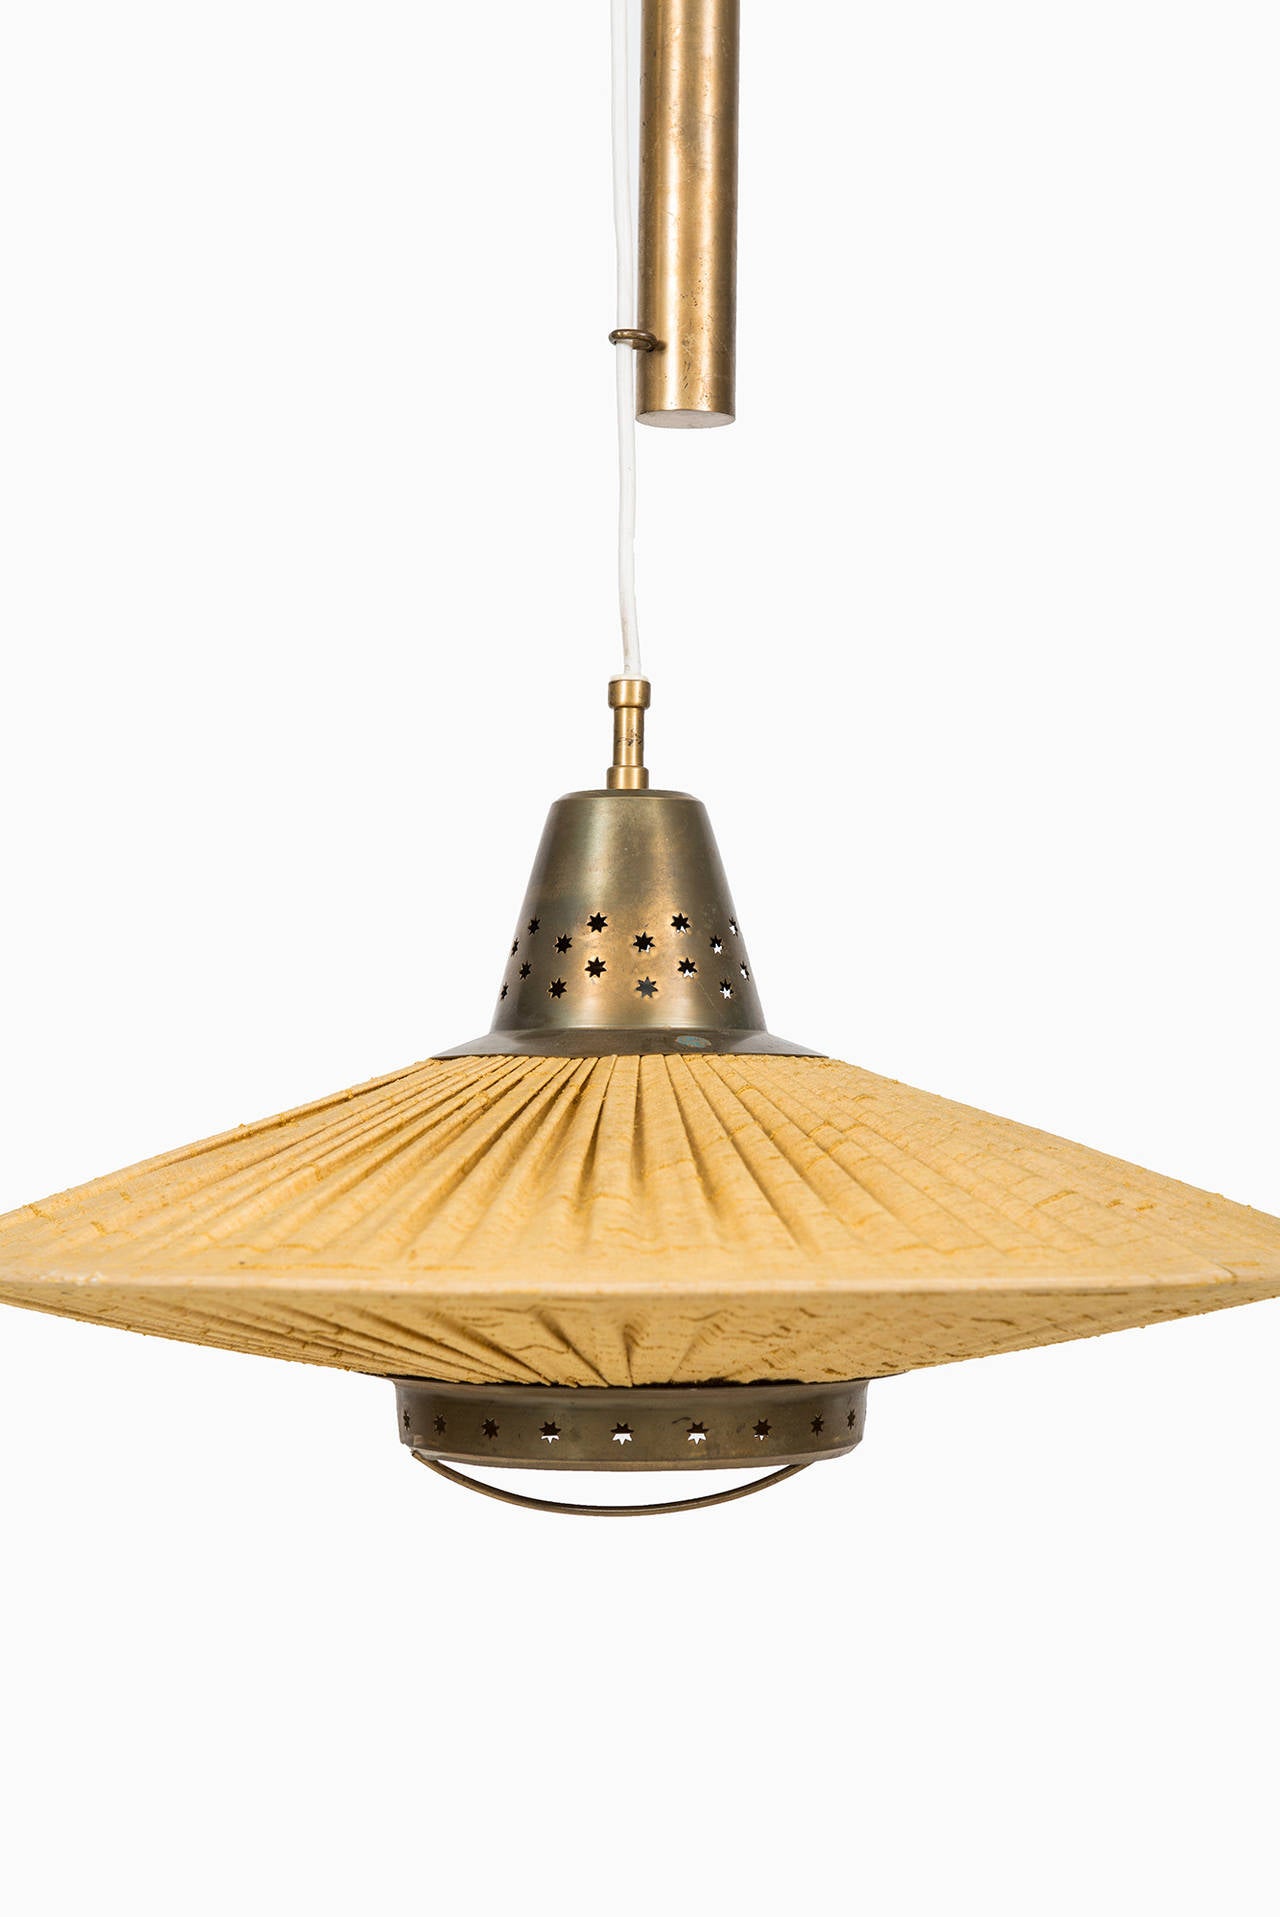 Rare height adjustable ceiling lamp attributed to Hans Bergström. Produced by Bergbom in Sweden.